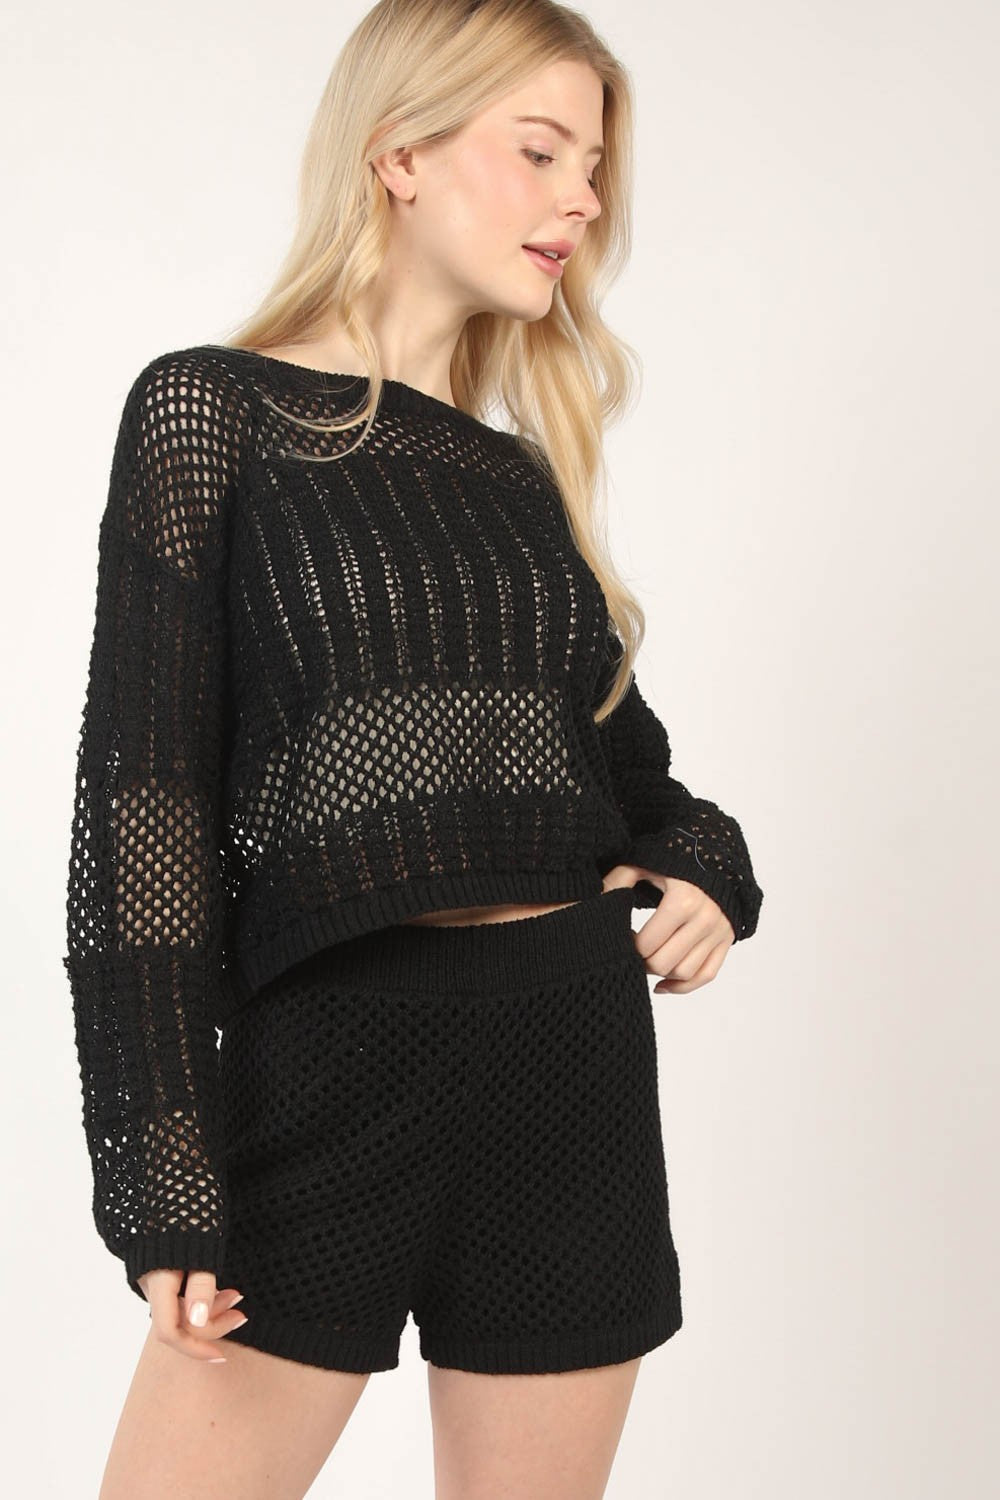 Knitted Openwork Cropped Cover Up and Shorts Set